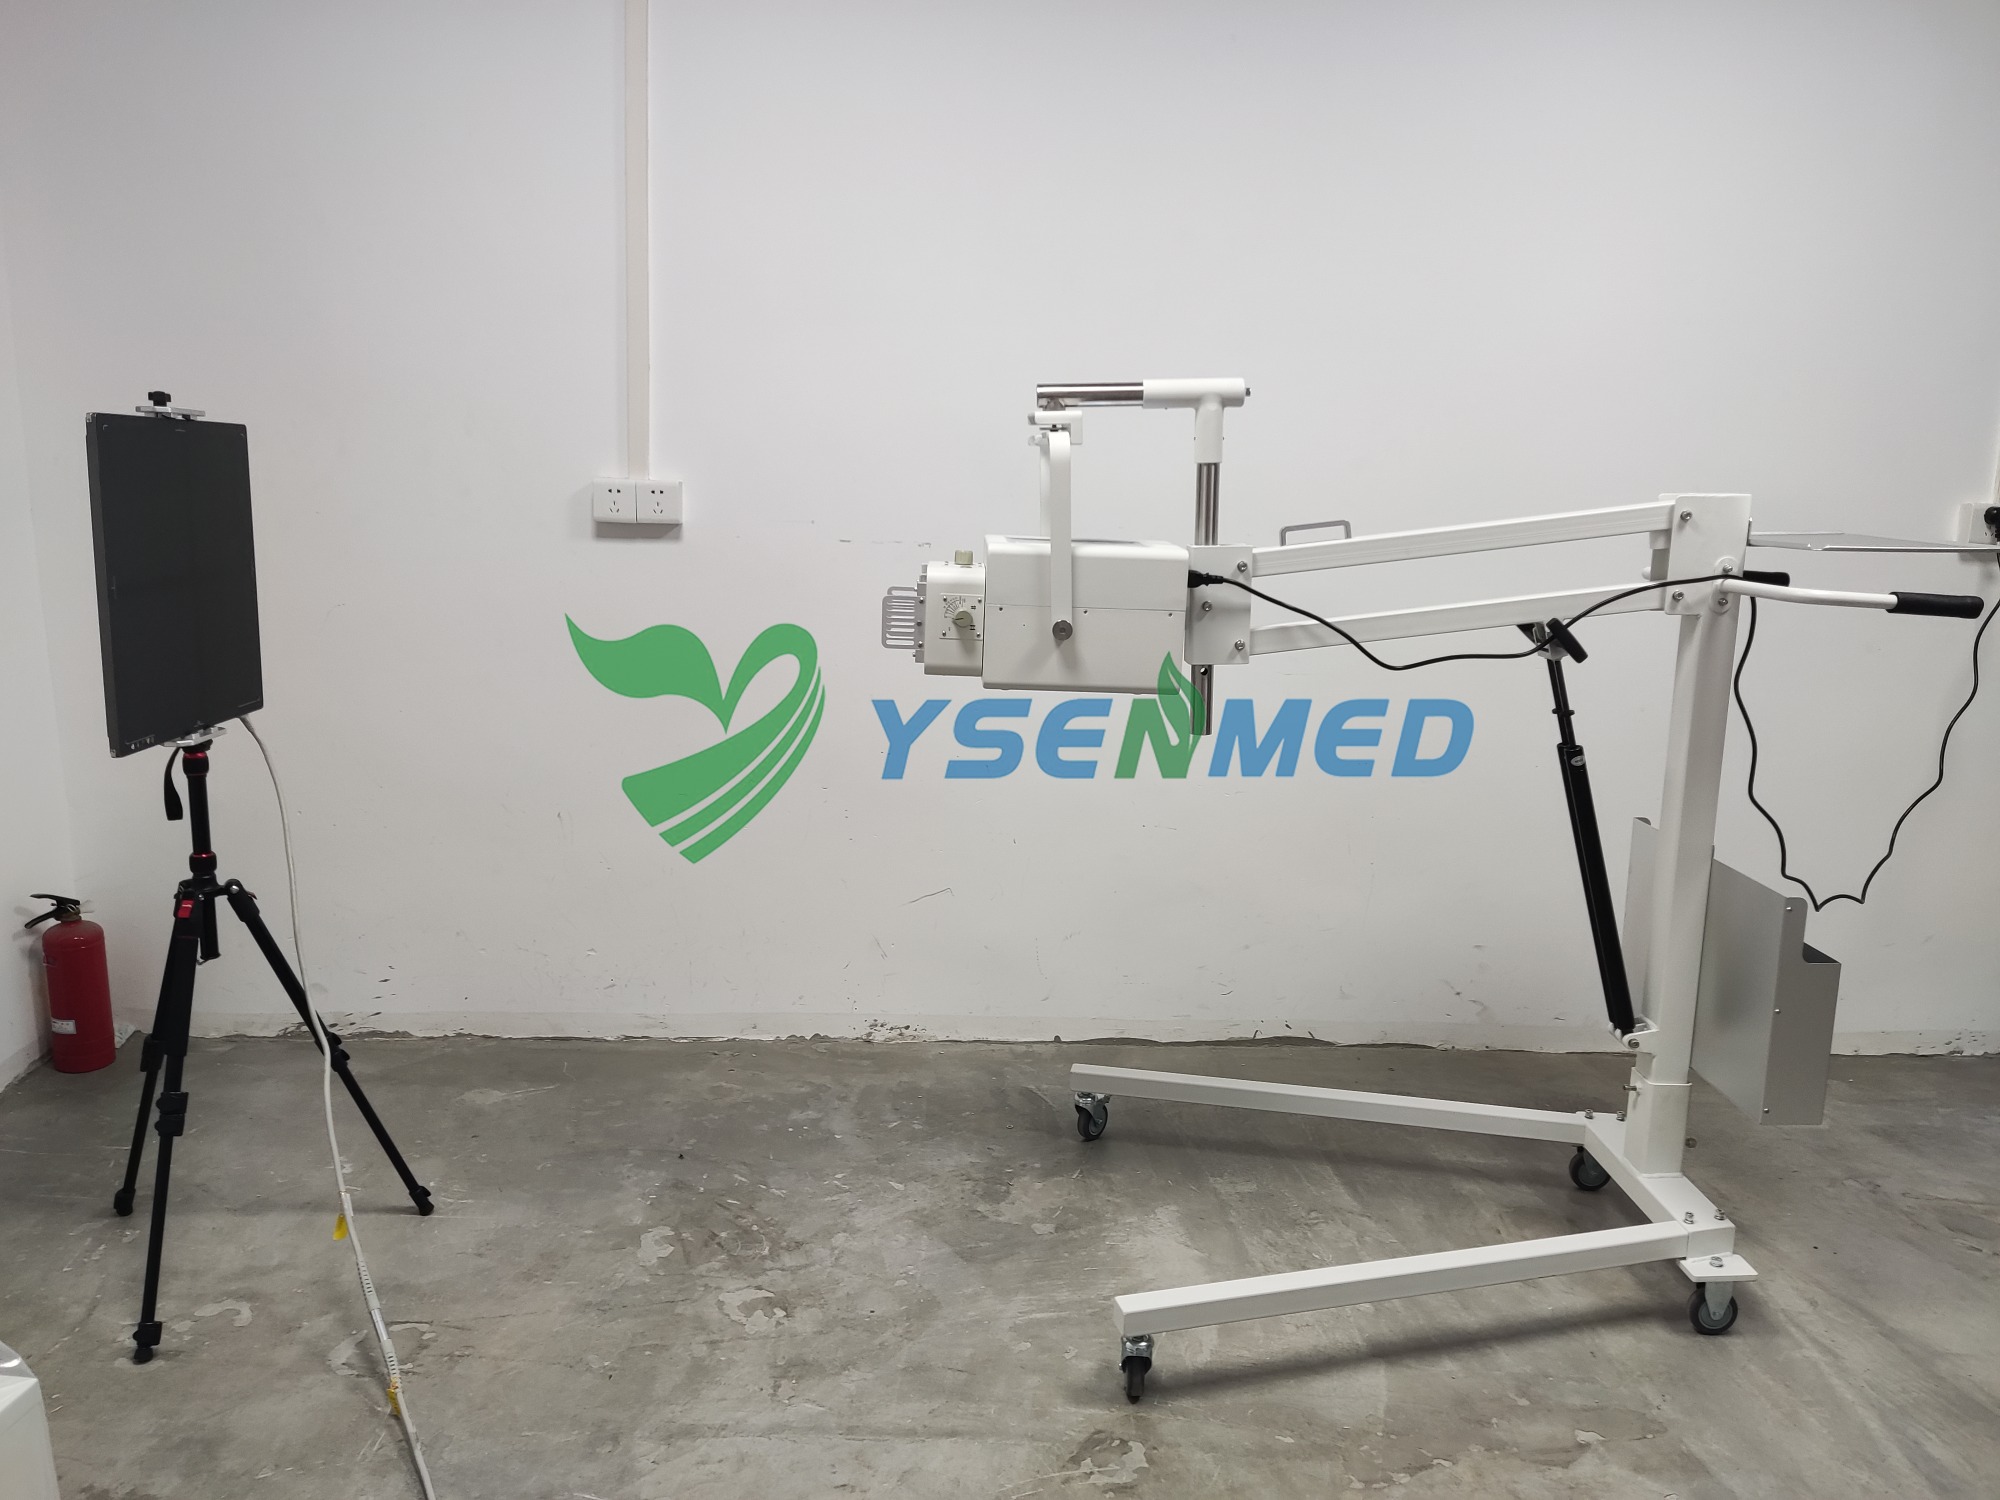 YSENMED YSX056-PE 5.6kW portable DR system is installed in East Timor.